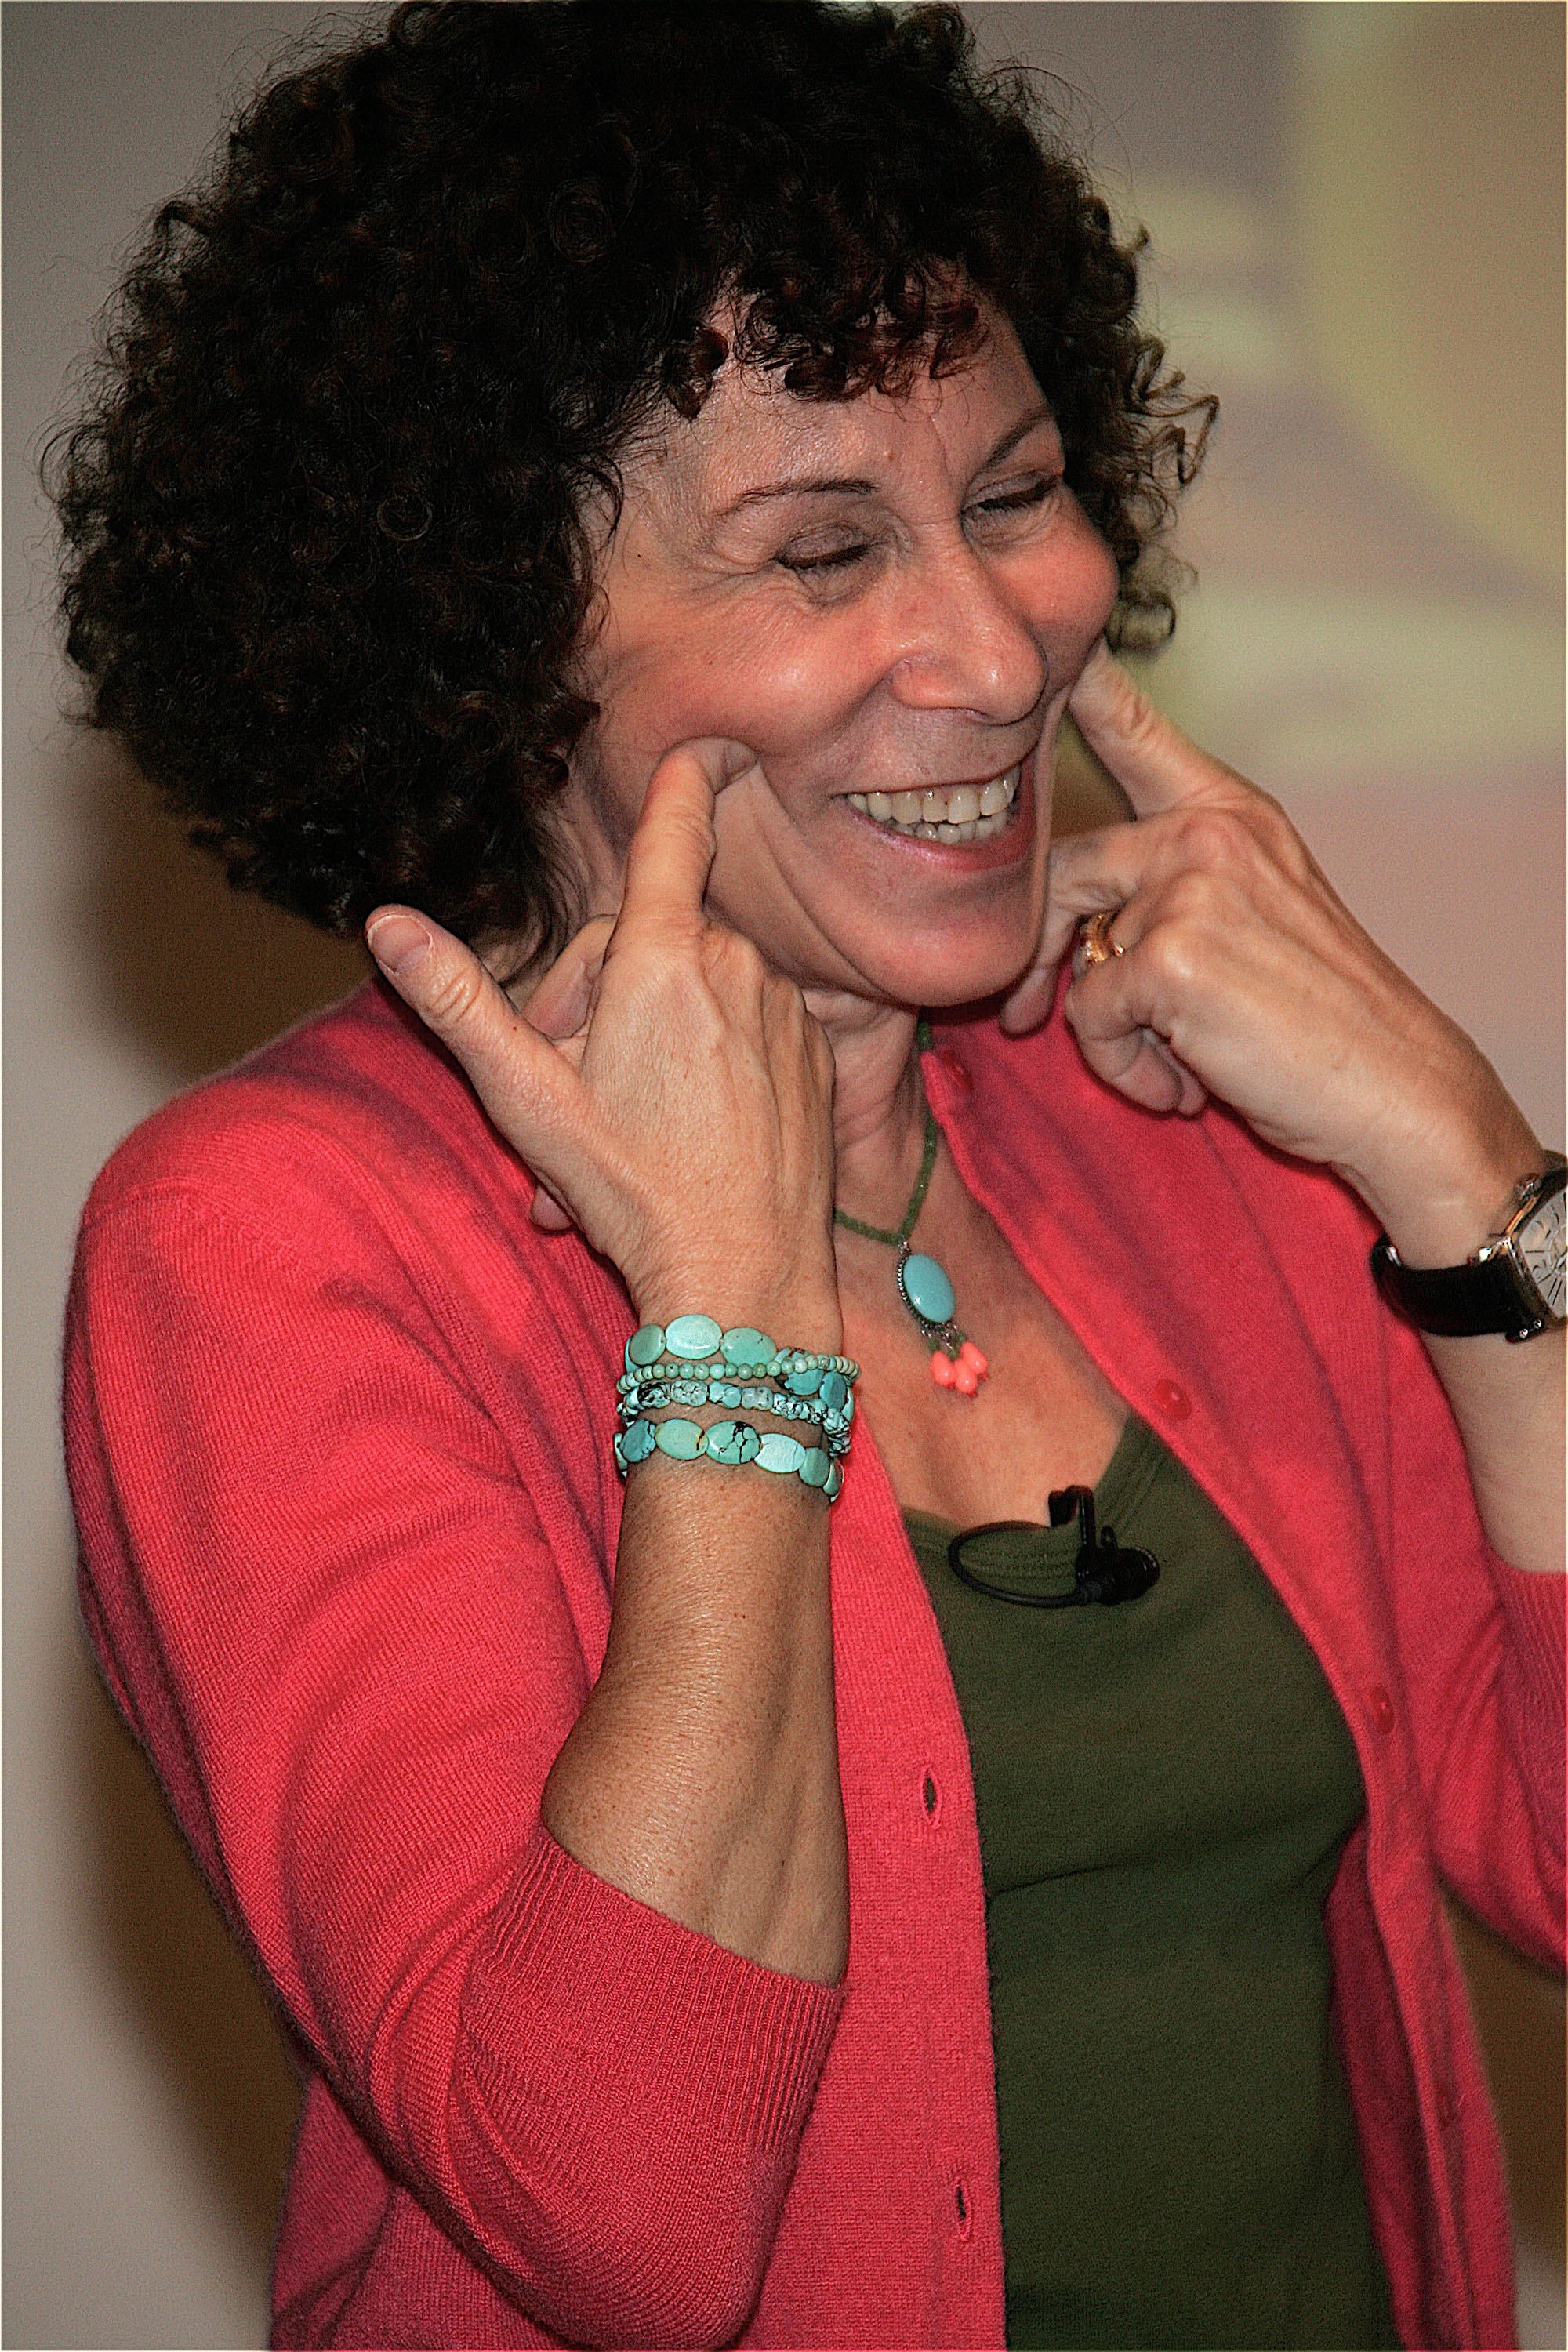 Rhea Perlman during the ribbon-cutting ceremony for the grand opening of a new main library in Santa Monica, California on January 7, 2006 | Source: Getty Images